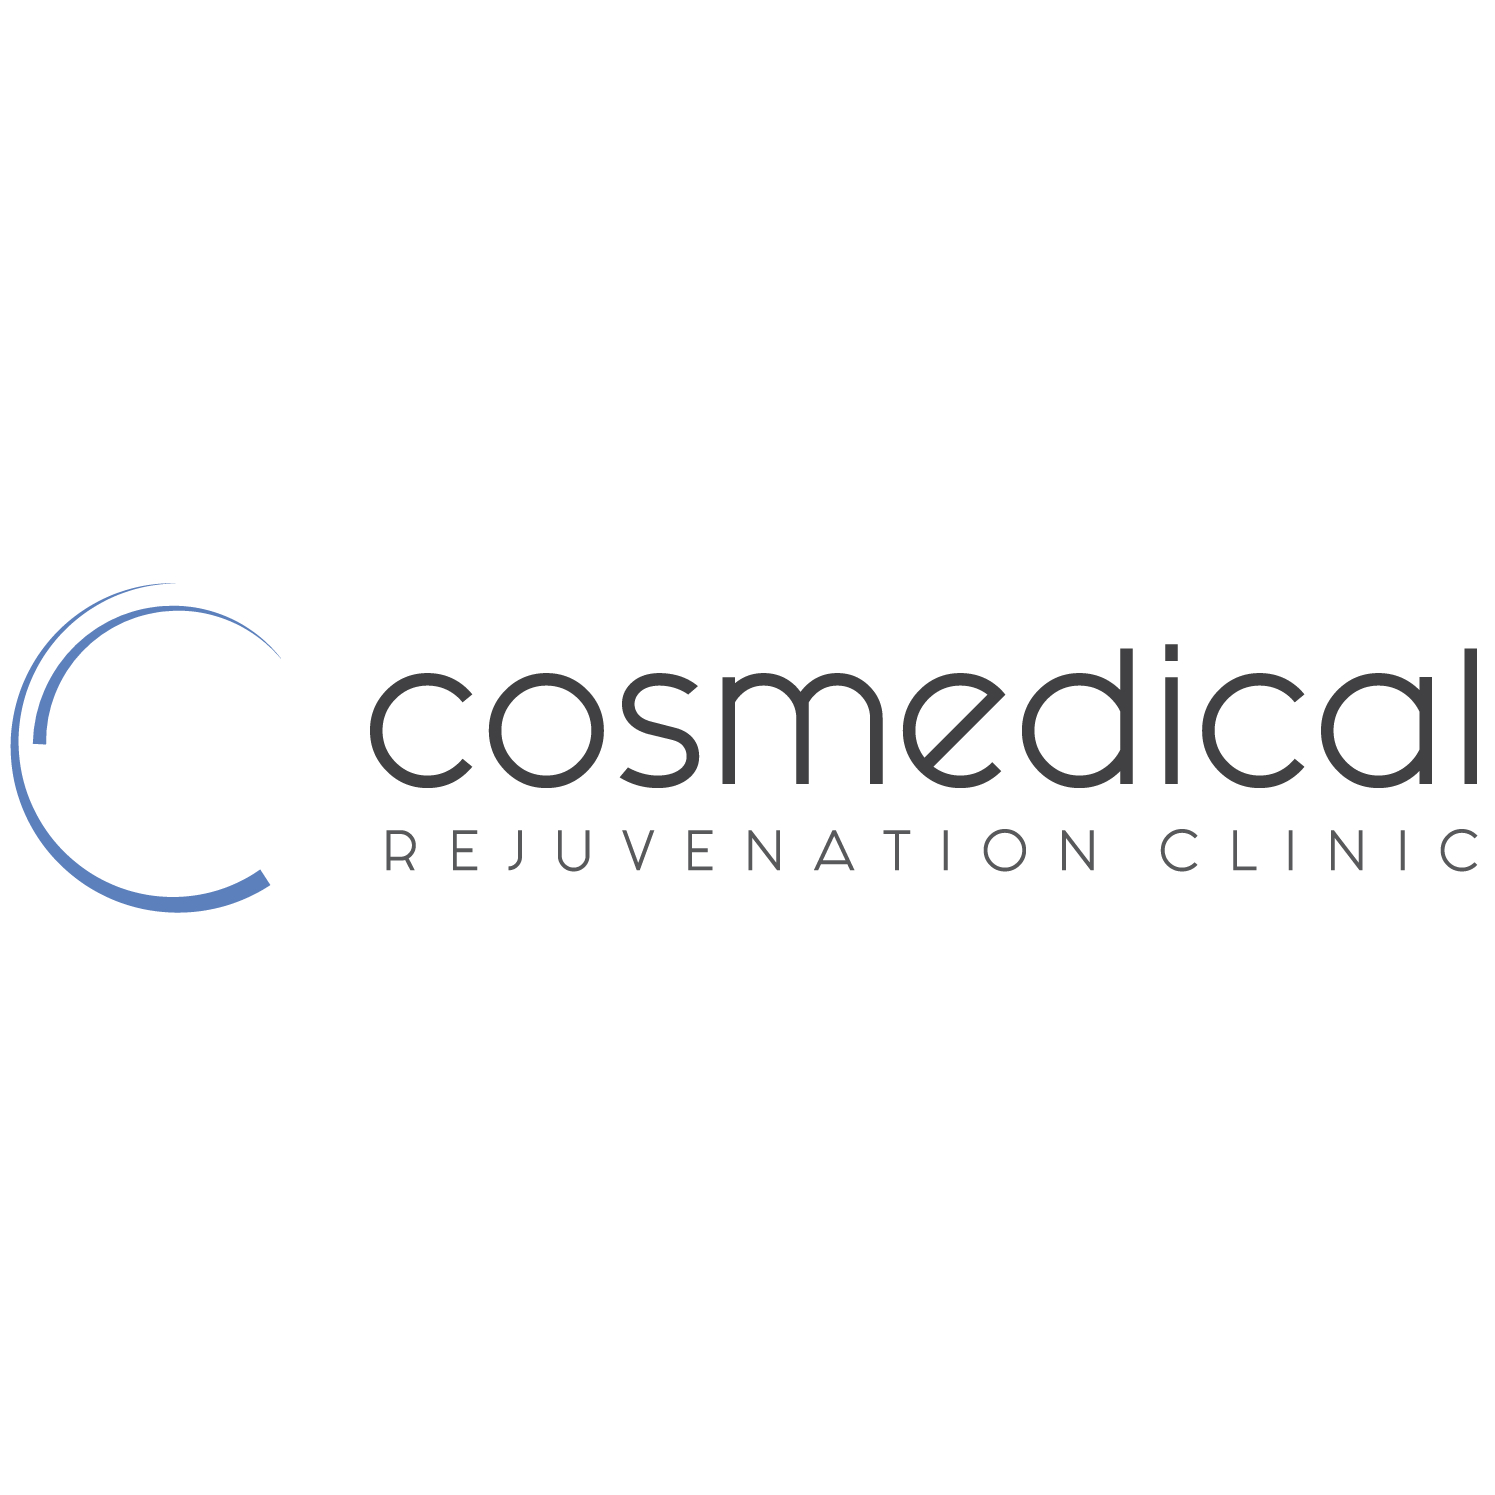 Cosmedical Rejuvenation Clinic - Cosmetic & Plastic Surgery